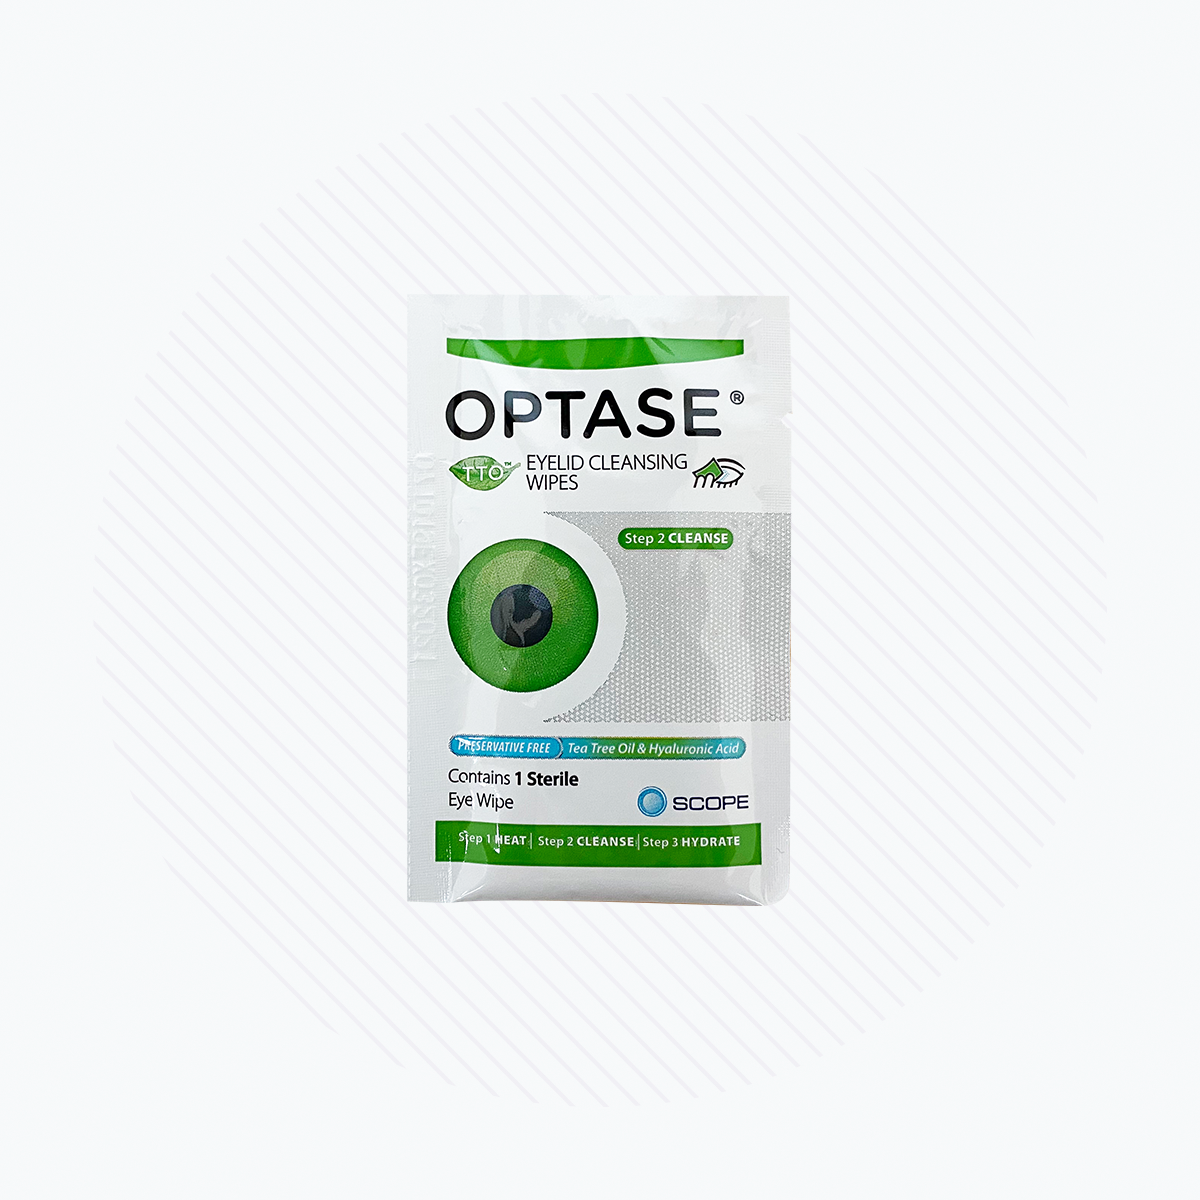 Optase Tea Tree Oil Eyelid Wipes - Preservative Free wipes for Dry Eye and Blepharitis, Box of 20